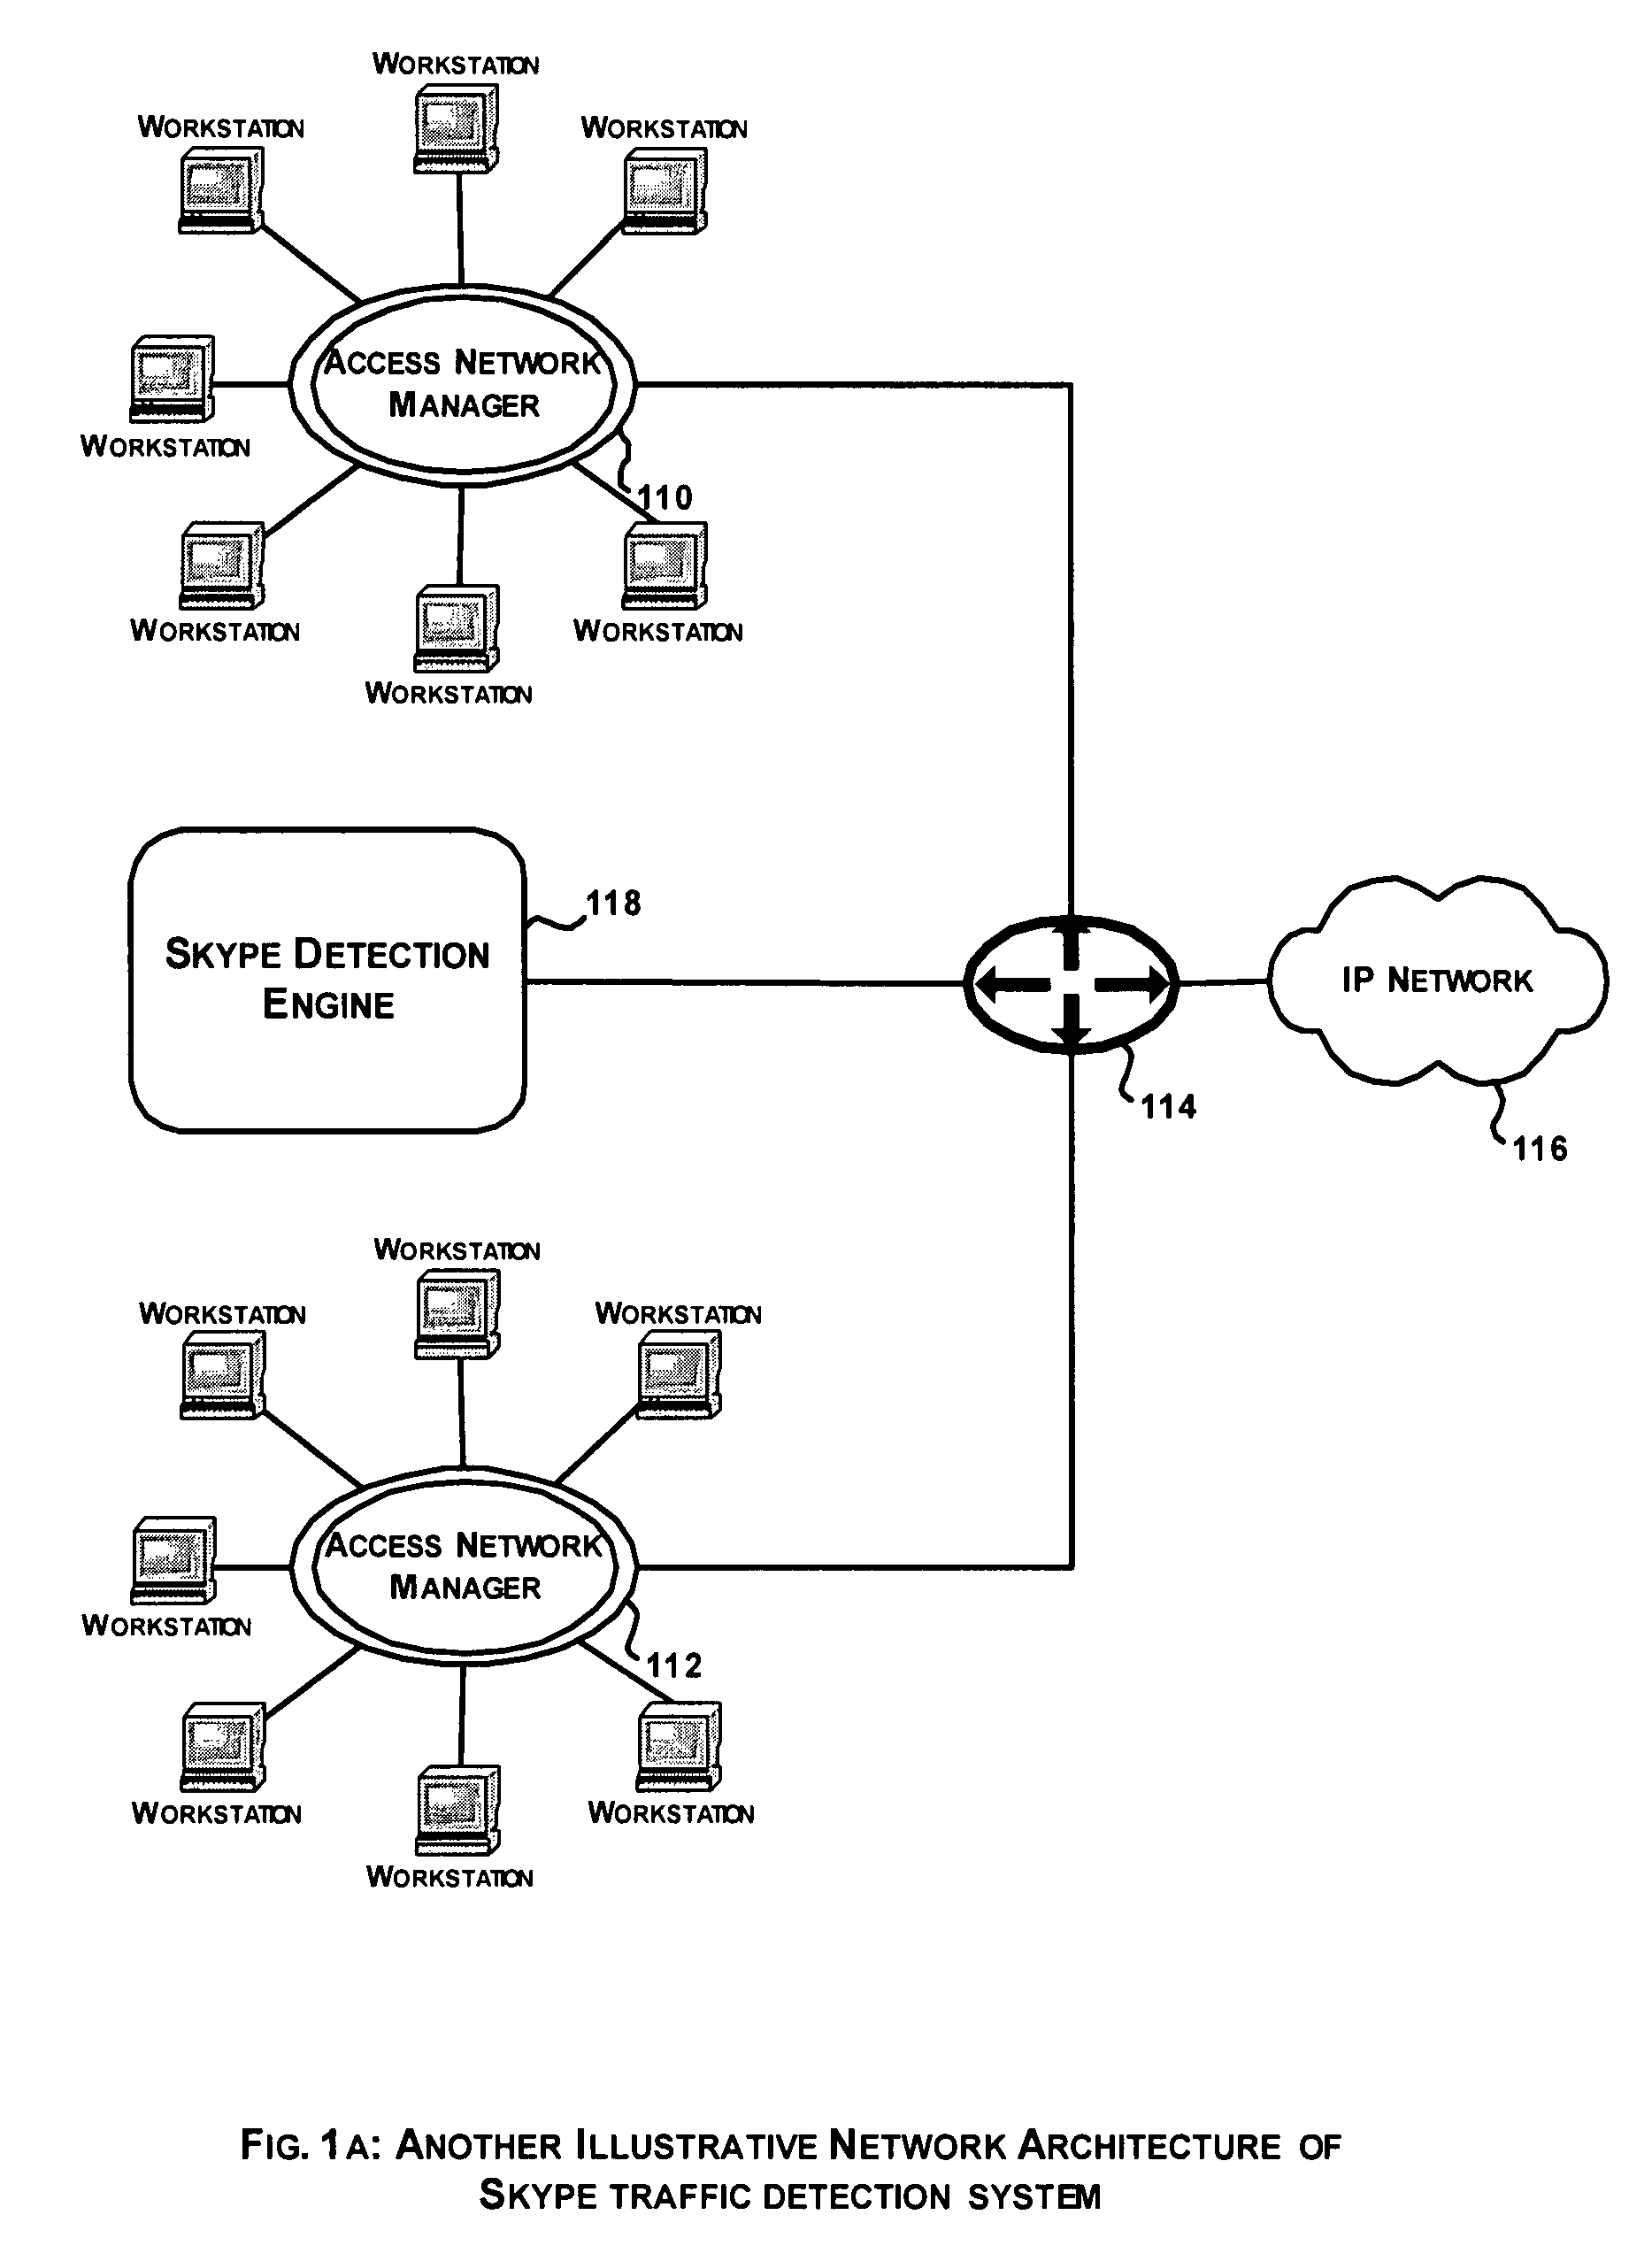 System and method for Skype traffic detection